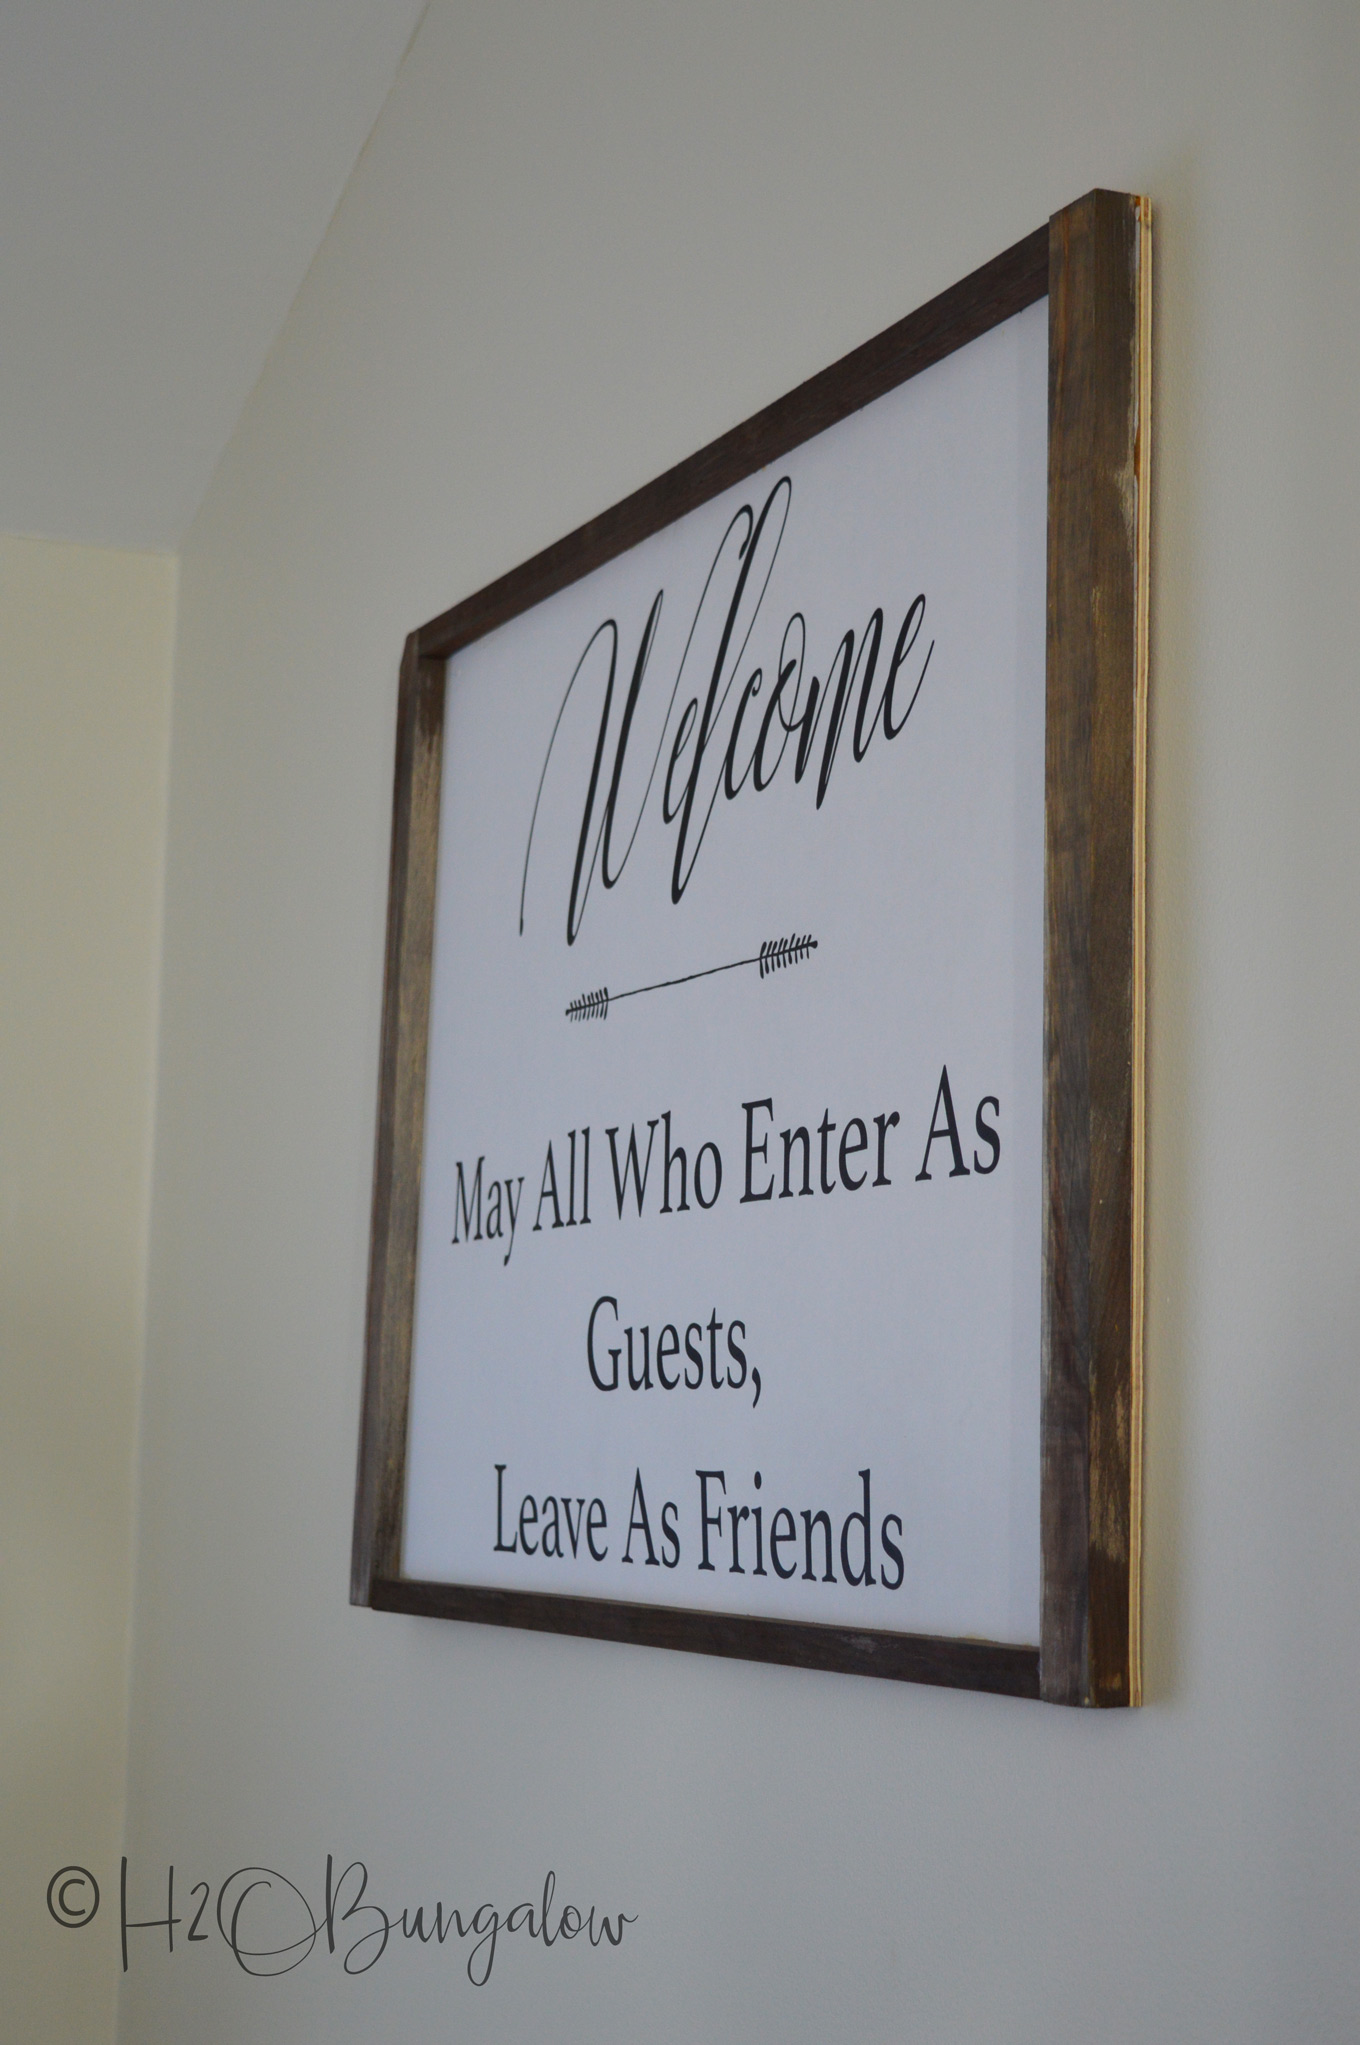 Tutorial for a DIY engineer print large welcome sign. Download my free graphic or follow the instructions and make your own large wood framed welcome sign.